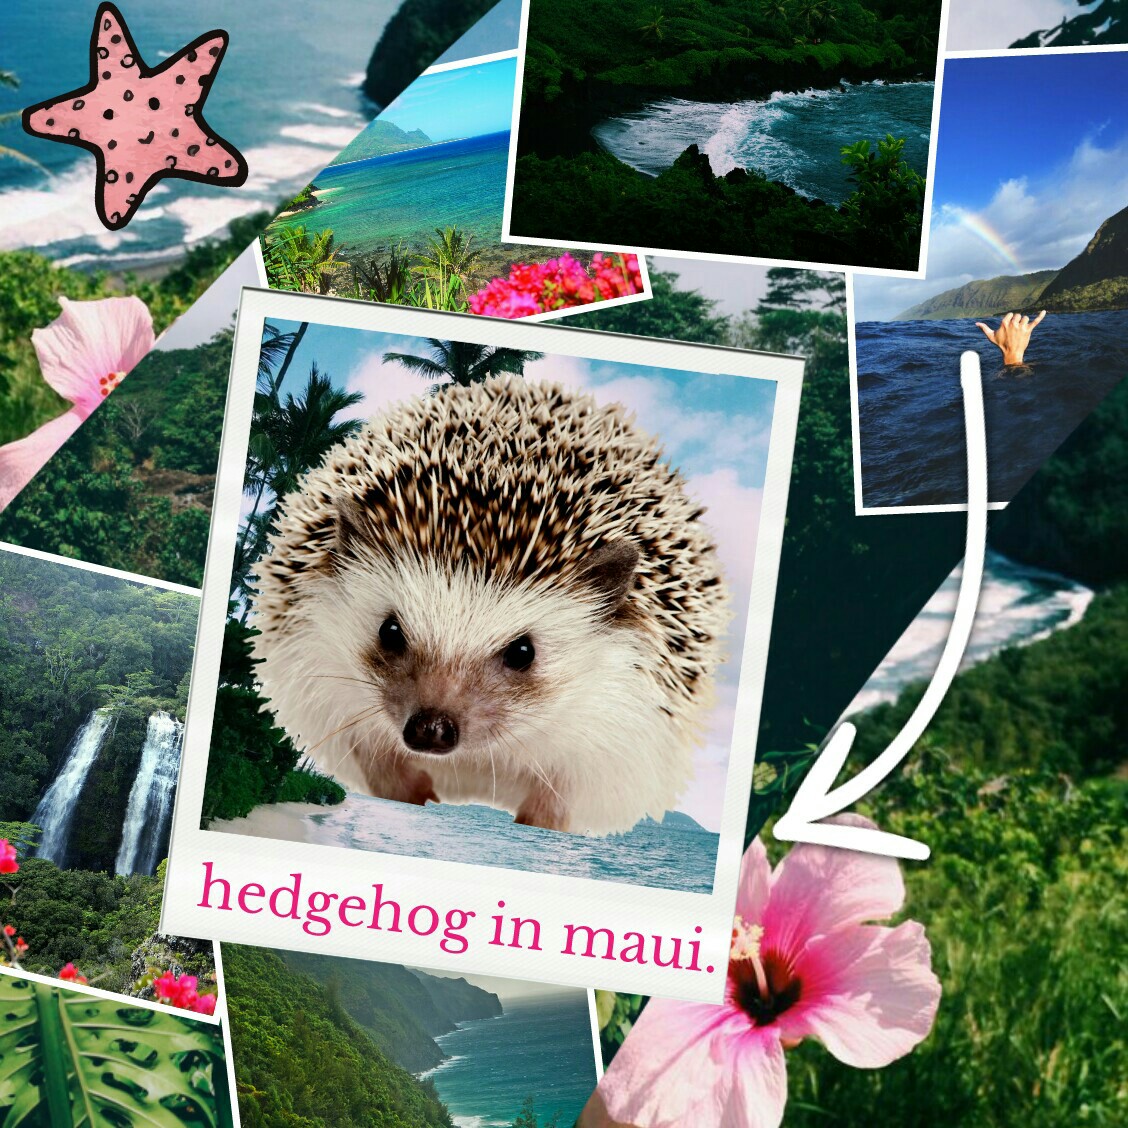 🌼 tap for more 🌼
oh goodness last one of this series. piccollage deleted my progress halfway through ugh. well, i have some more collages in mind! (a lot more) so, for the last time, what would a hedgehog do in maui?